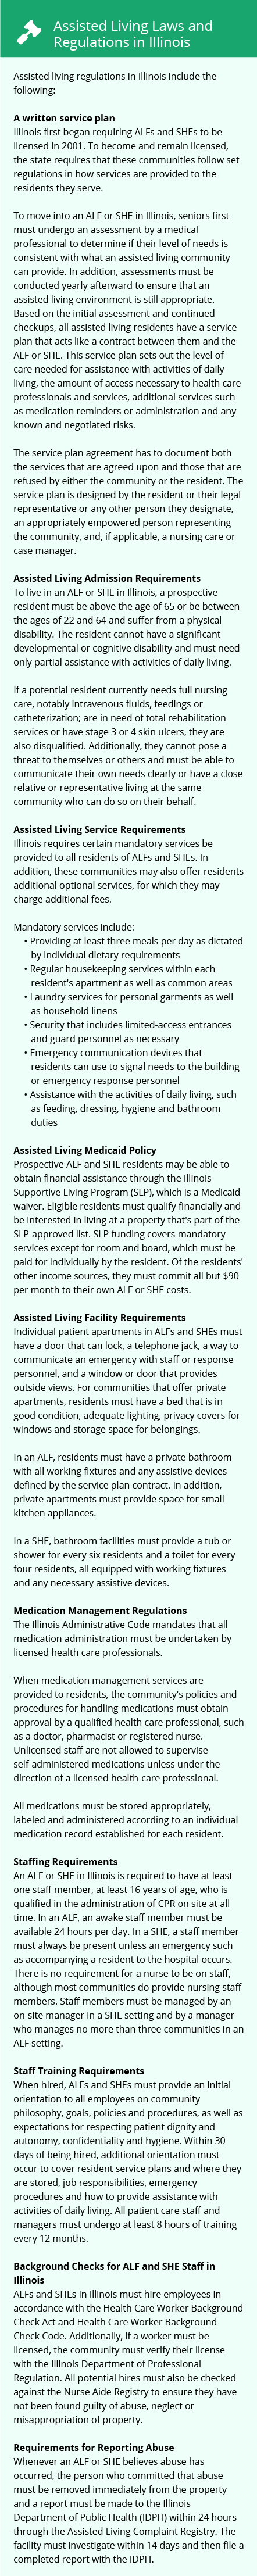 Laws and Regulations in Illinois